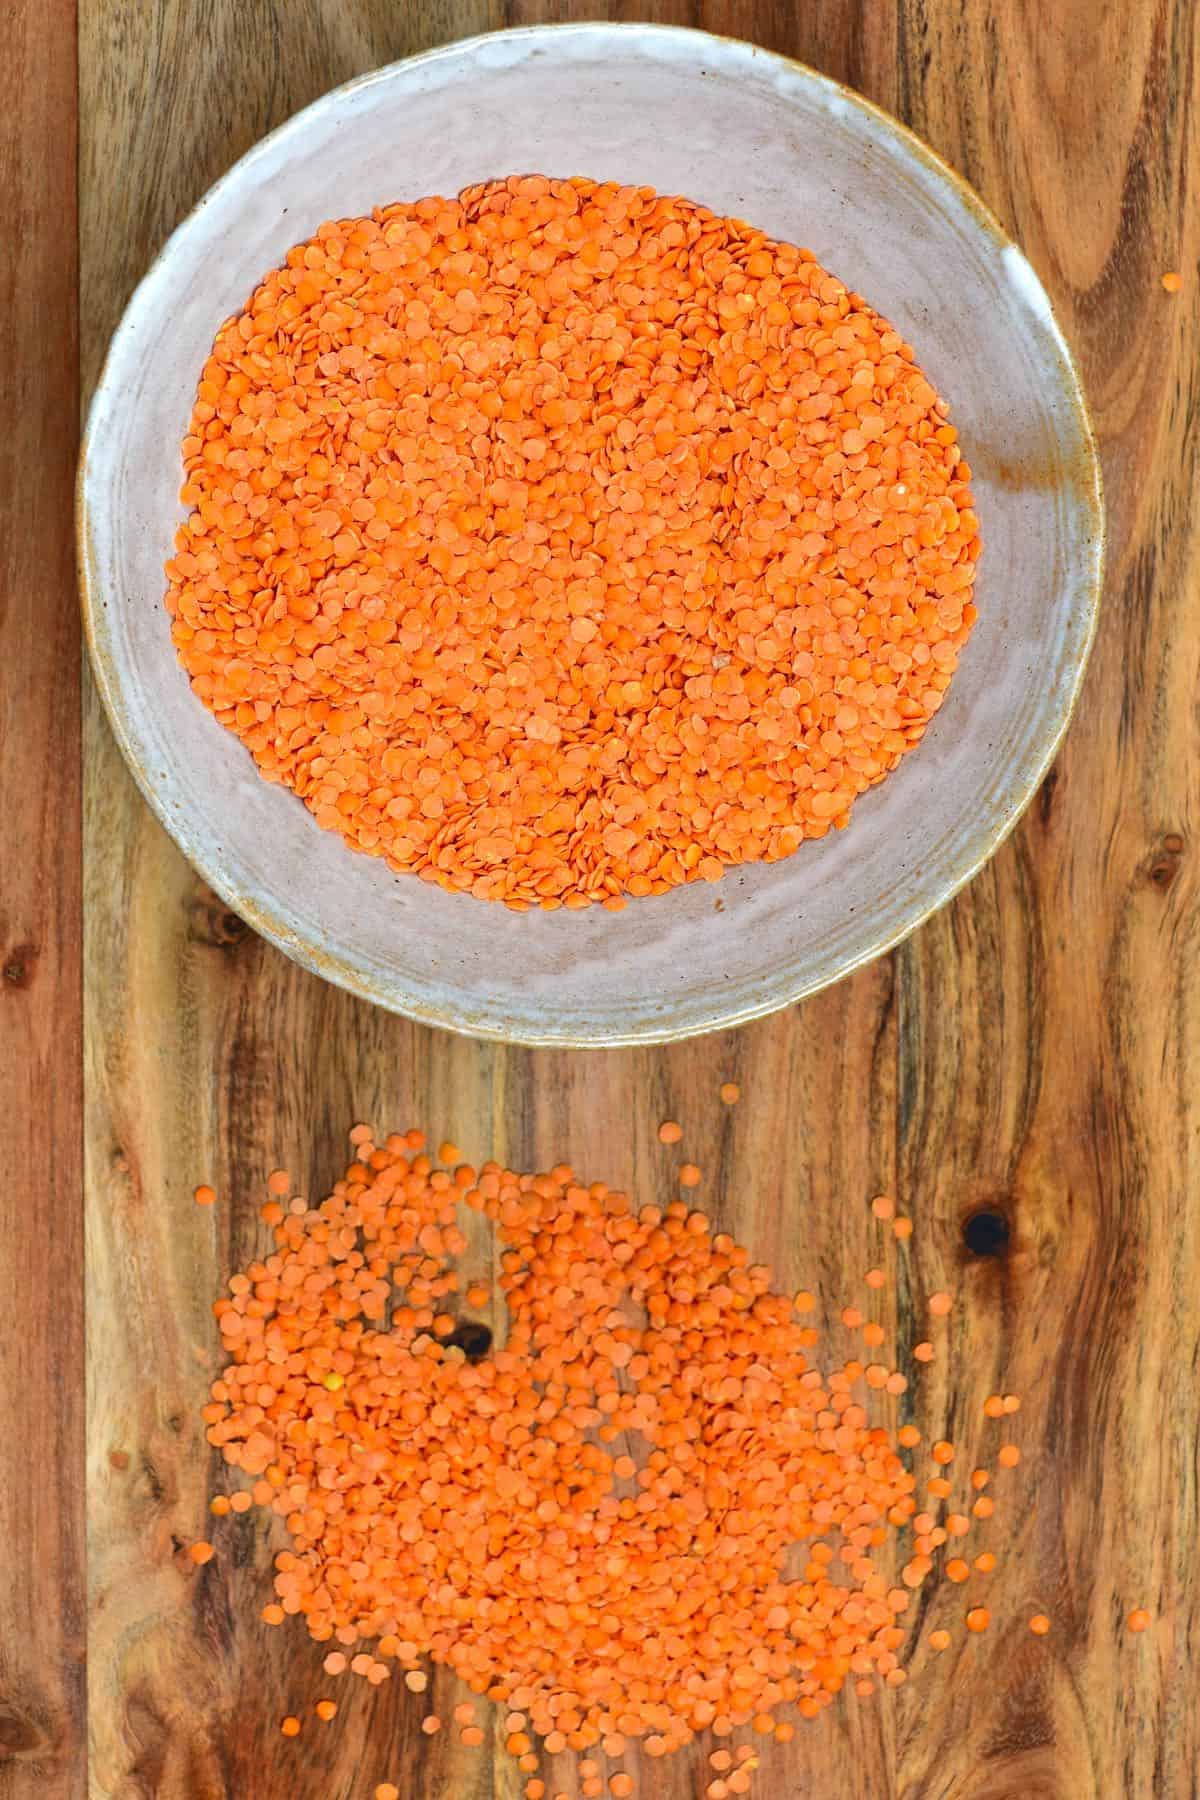 Red lentil beans in a bowl and sprinkled on a wooden board